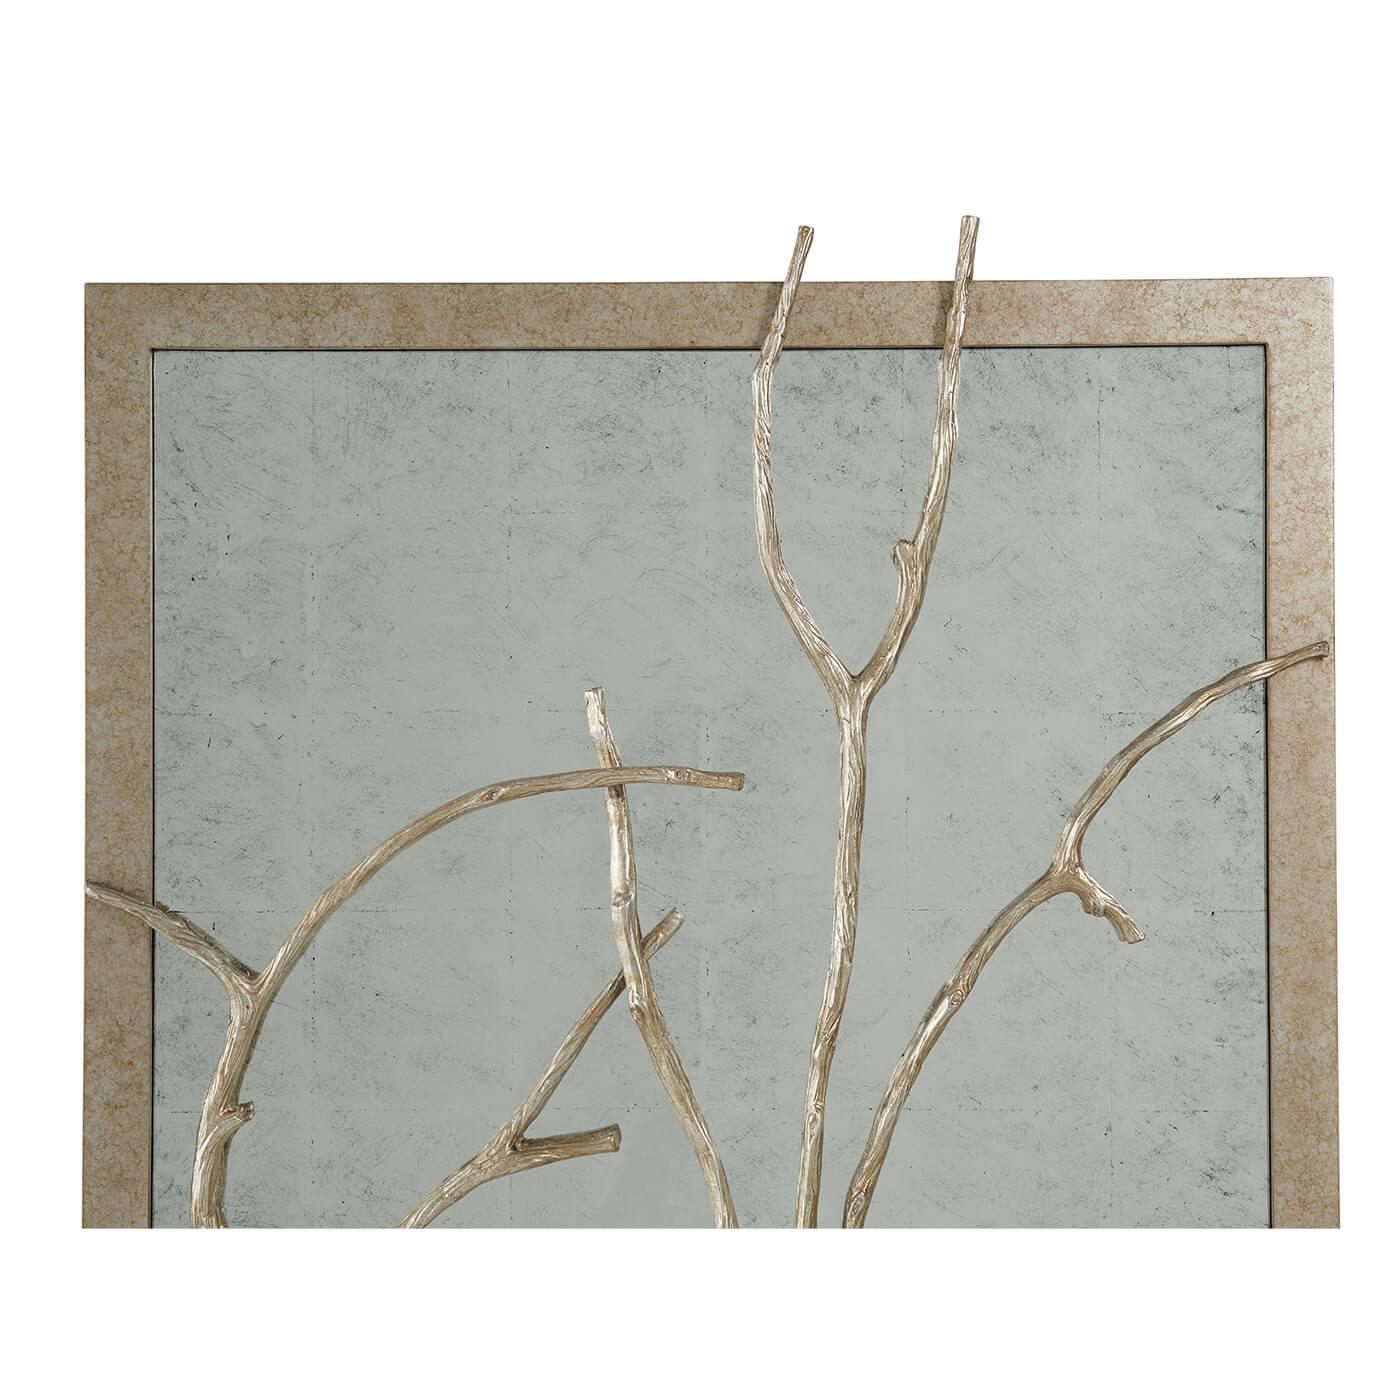 A set of three silvered metal and silvered wood framed wall panels, each rectangular frame with a cast branch overlaid on an antiqued hand leafed mirror back.

Dimensions: 26